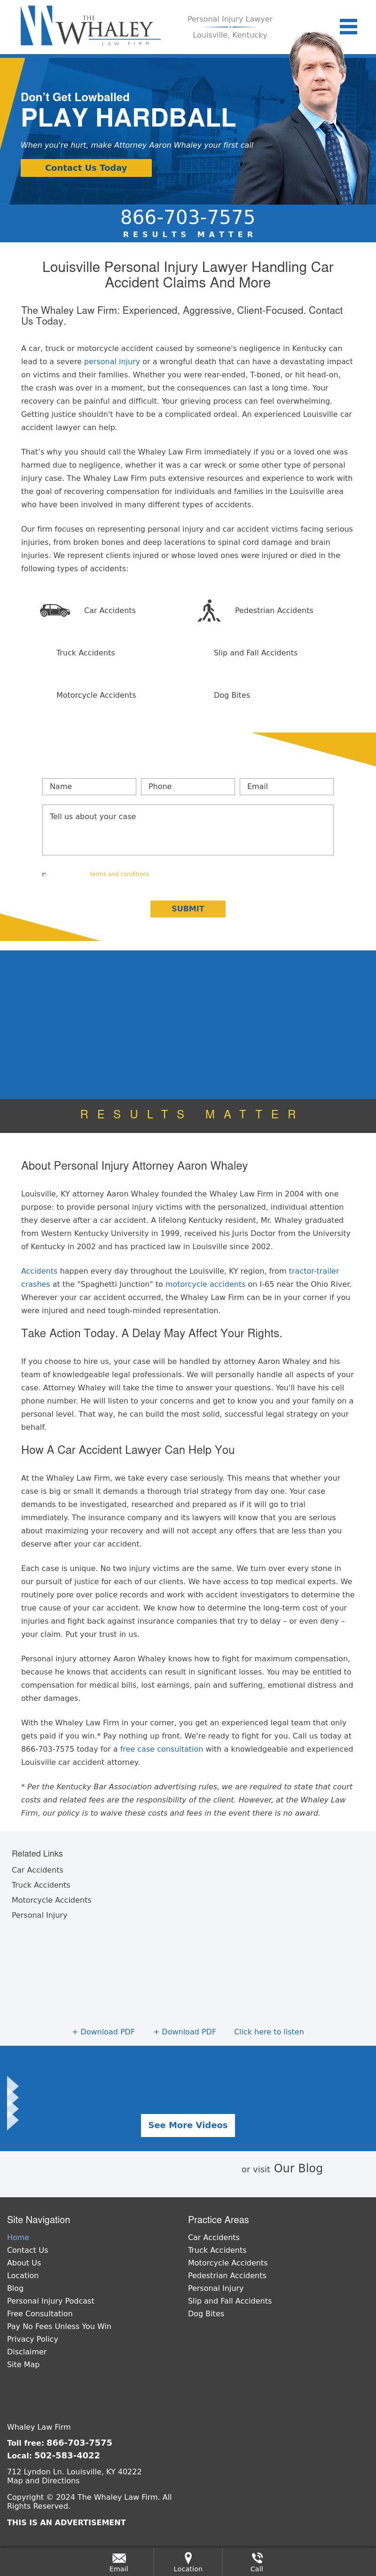 The Whaley Law Firm - Louisville KY Lawyers